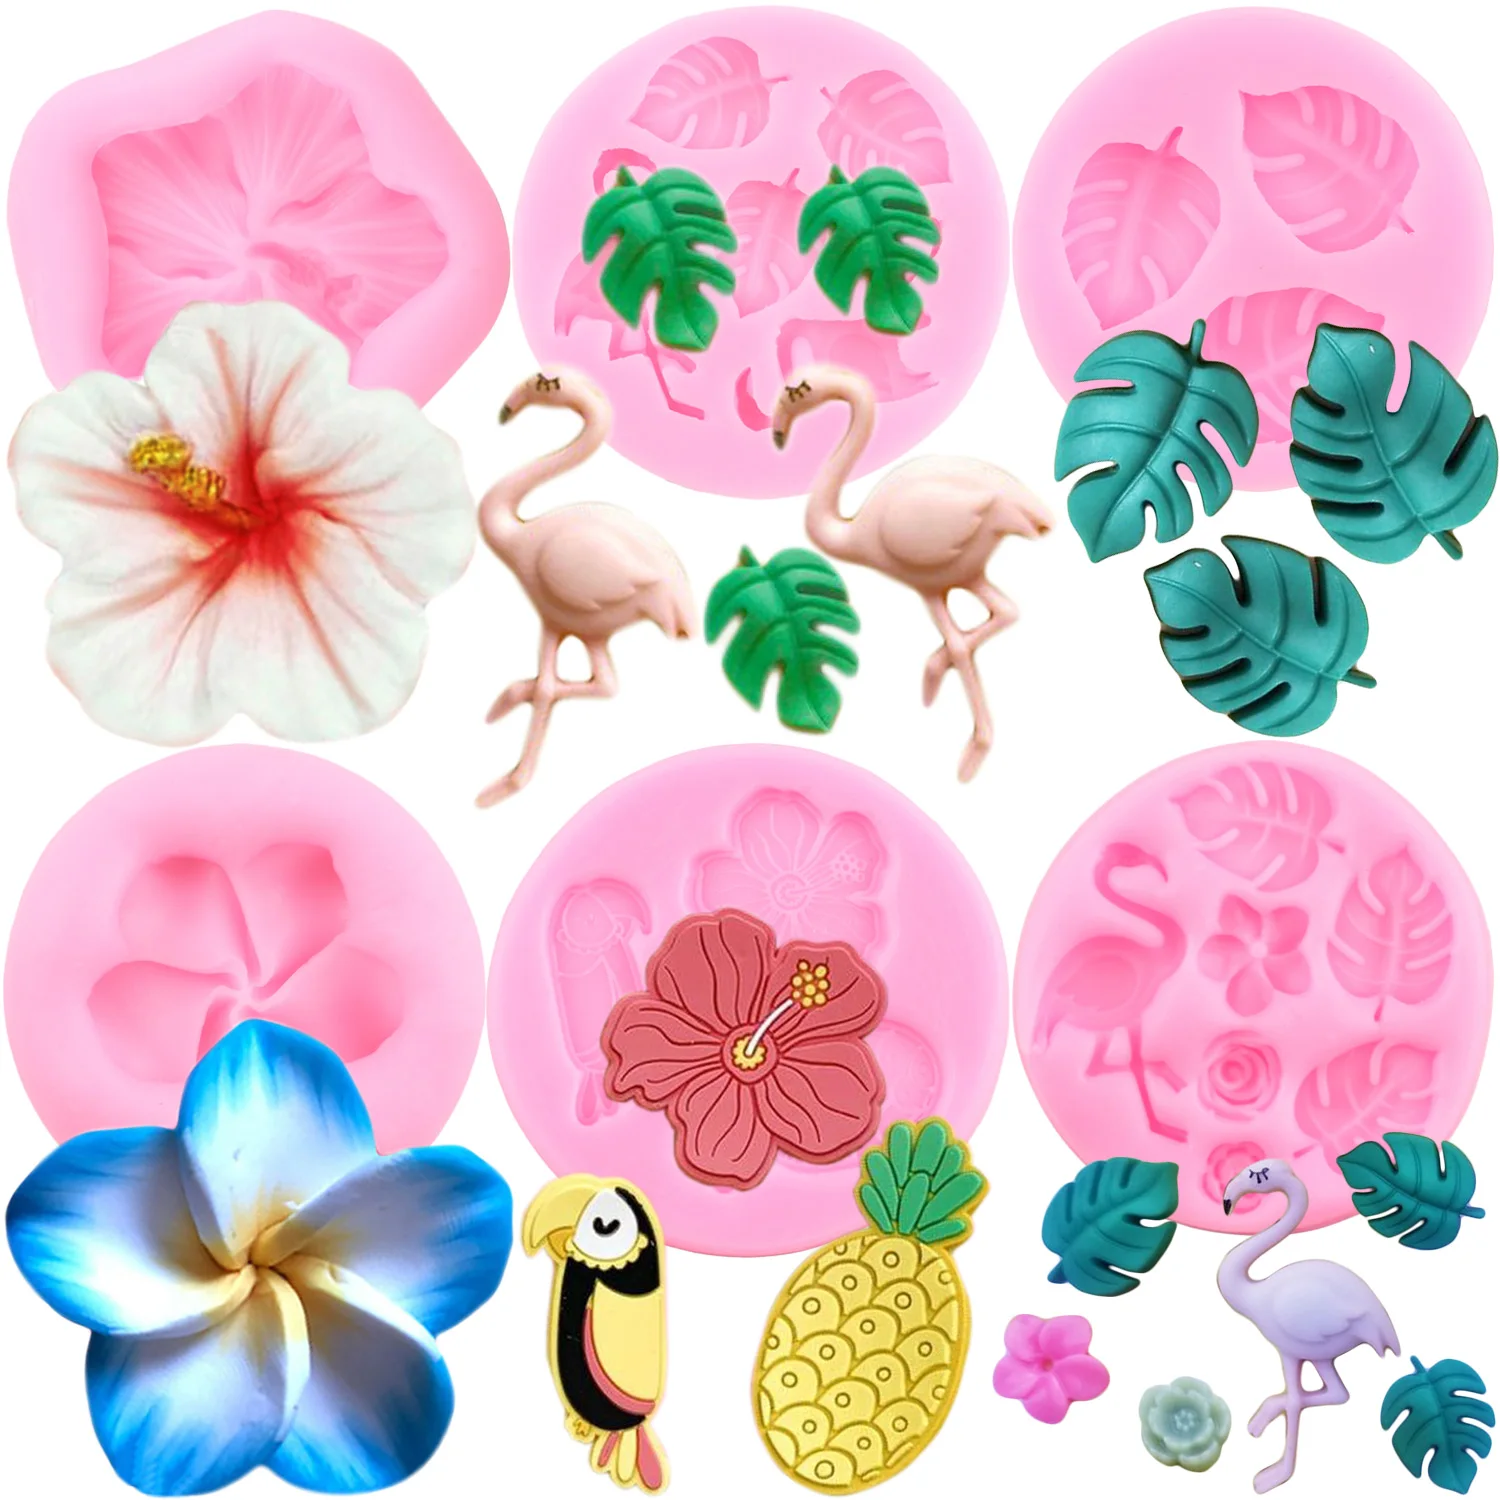 

Flamingo Tropical Leaf Silicone Mold Plumeria Hibiscus Flower Fondant Molds Pineapple Chocolate Moulds Cake Decorating Tools